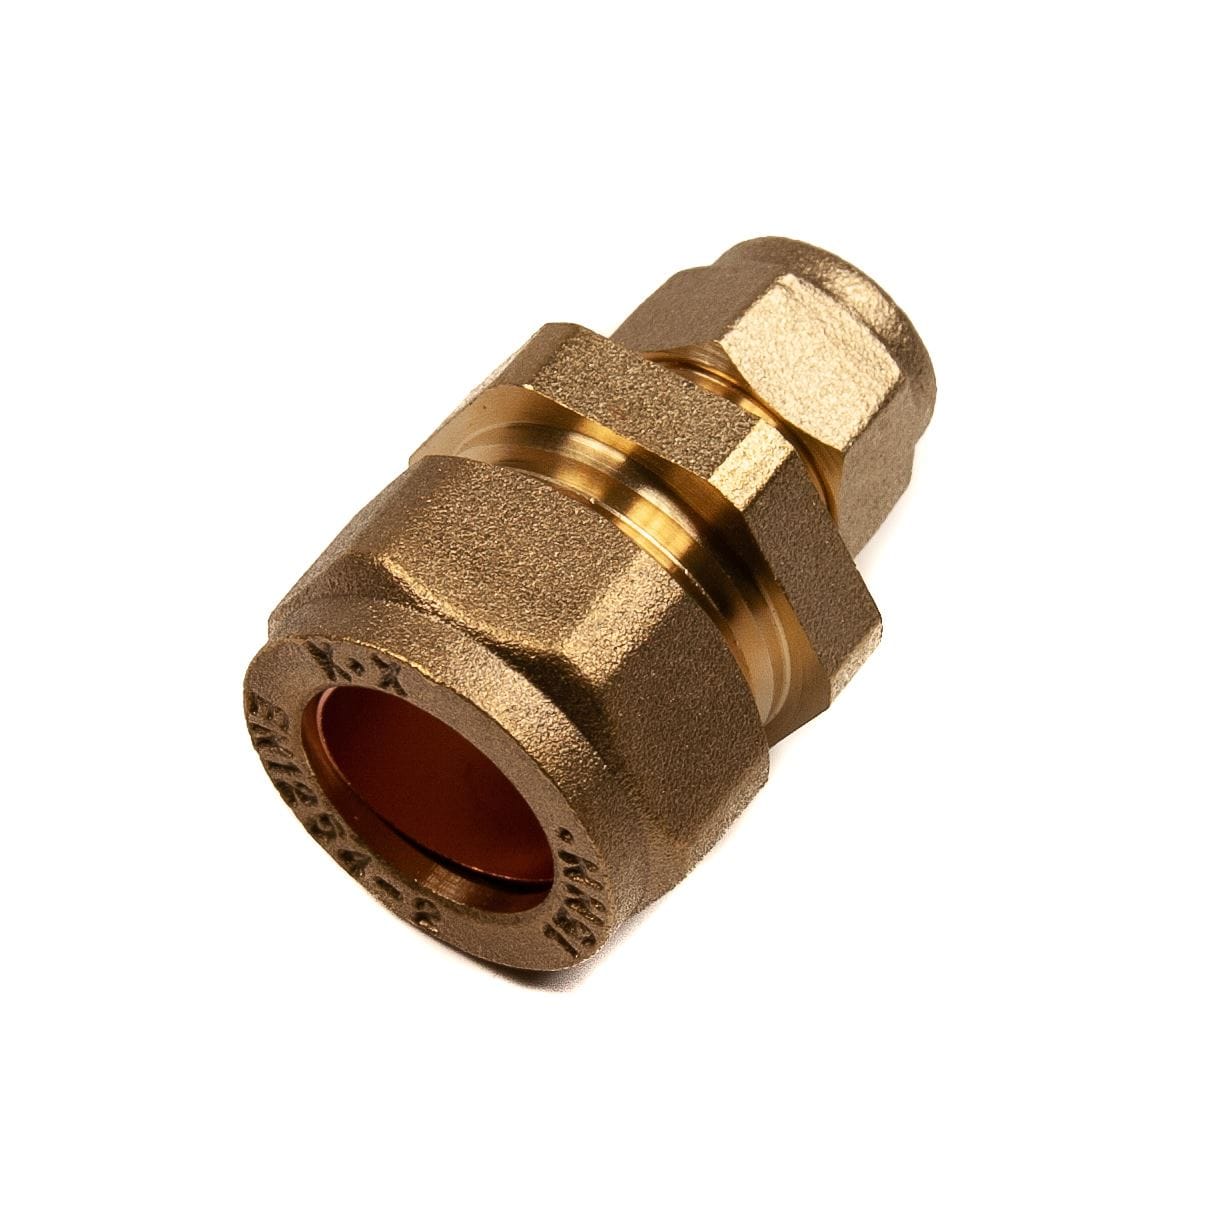 15mm x 8mm Compression Reducer Coupling Brass Compression Reducing Couplings Thunderfix 100015